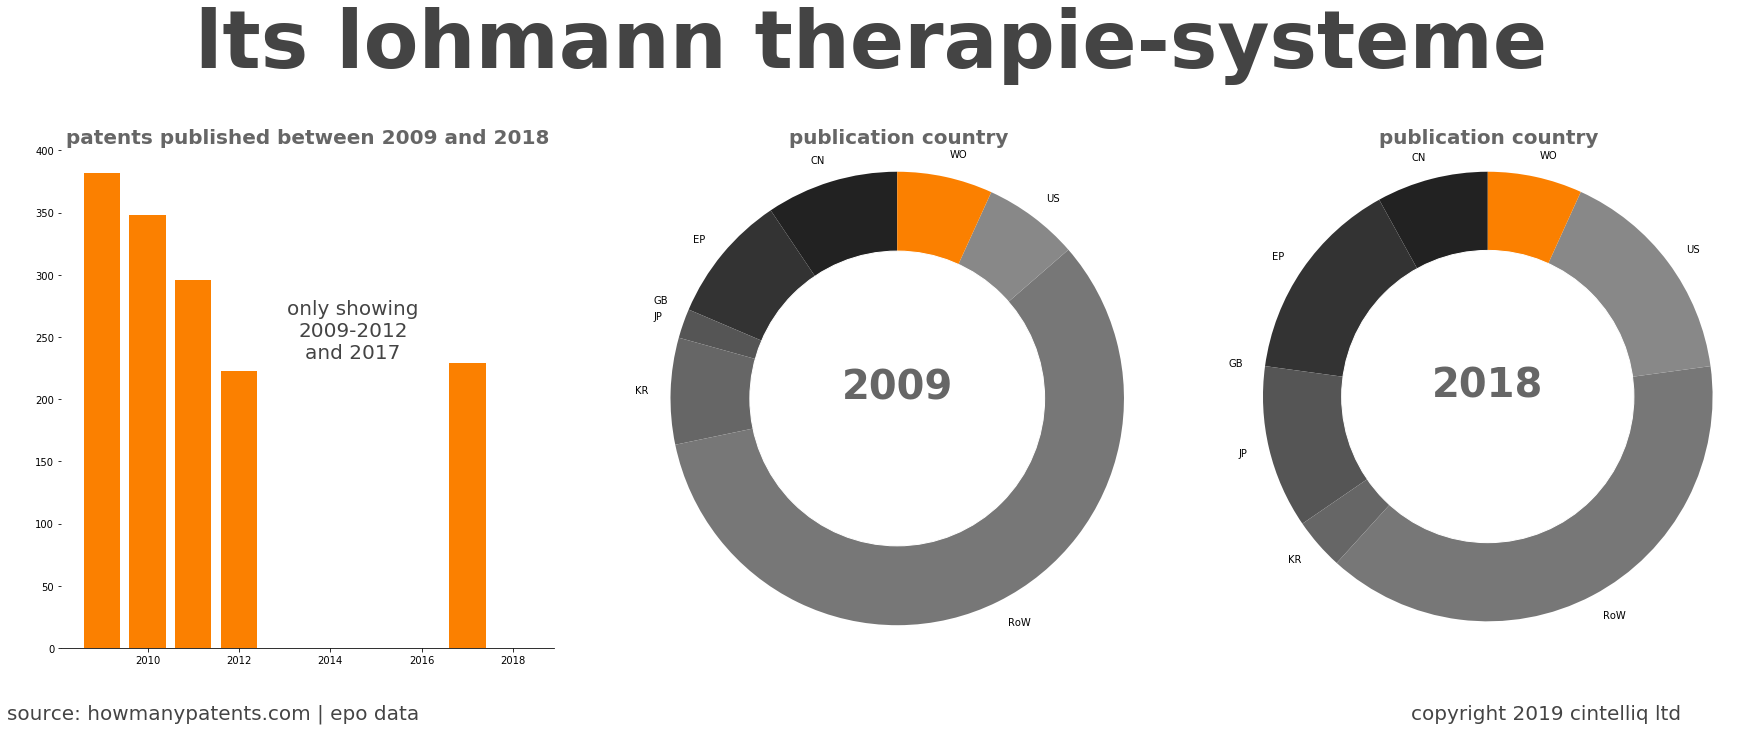 summary of patents for Lts Lohmann Therapie-Systeme